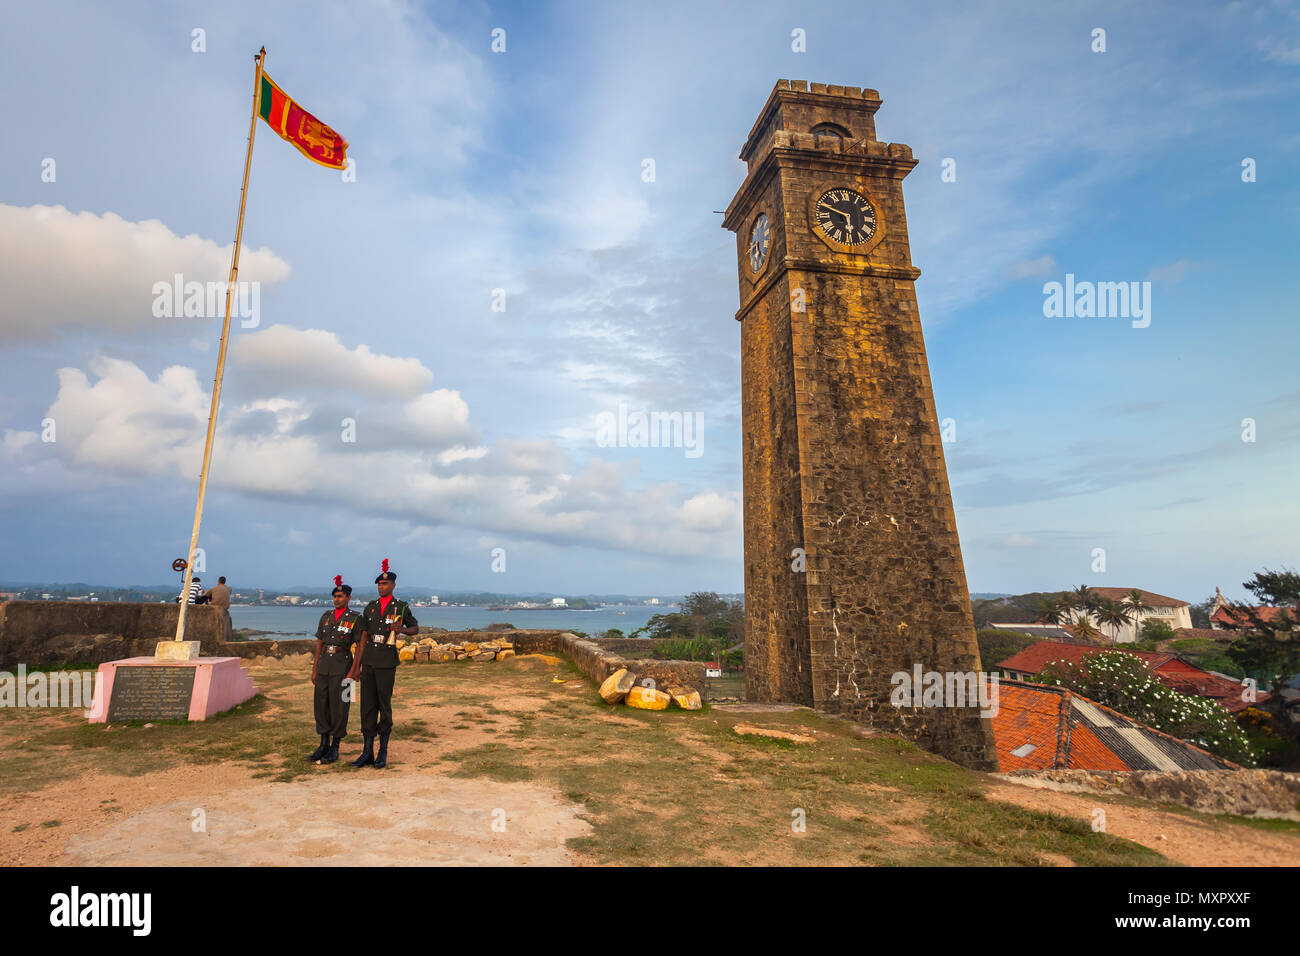 The national symbol of the Democratic Socialist Republic of Sri Lanka the state flag and two soldiers performing the guard of honor next to the clock tower. Galle Fort, UNESCO world heritage site. Stock Photo